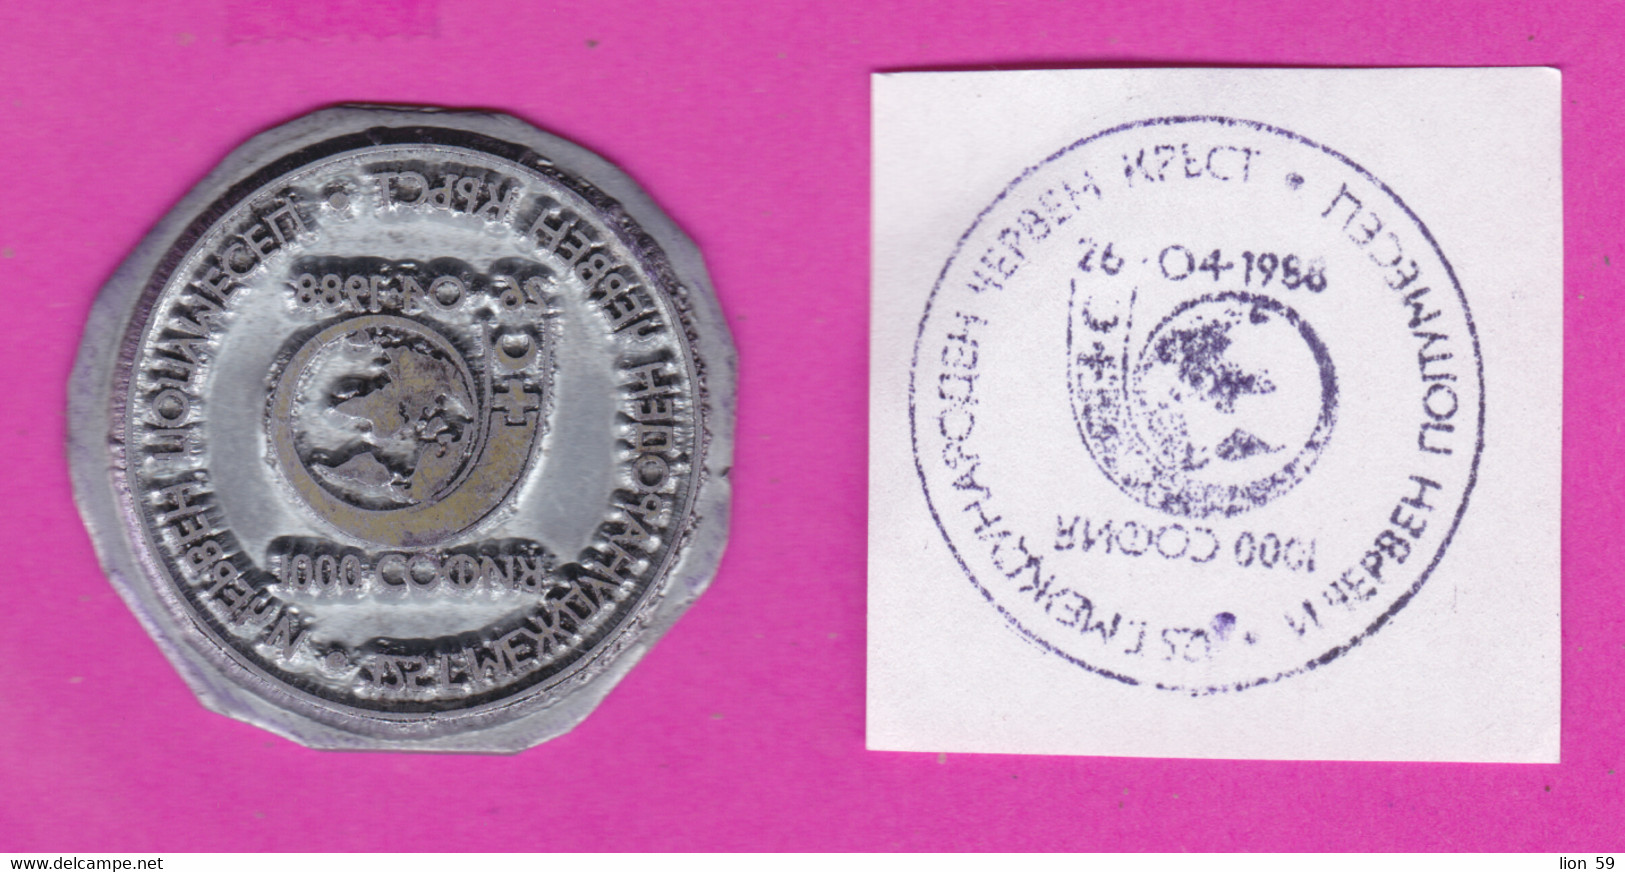 C330 / FDC - SEAL - 26.04.1988 - 125 Years Of The International Red Cross And Red Crescent  - Bulgaria Bulgarie - Croce Rossa